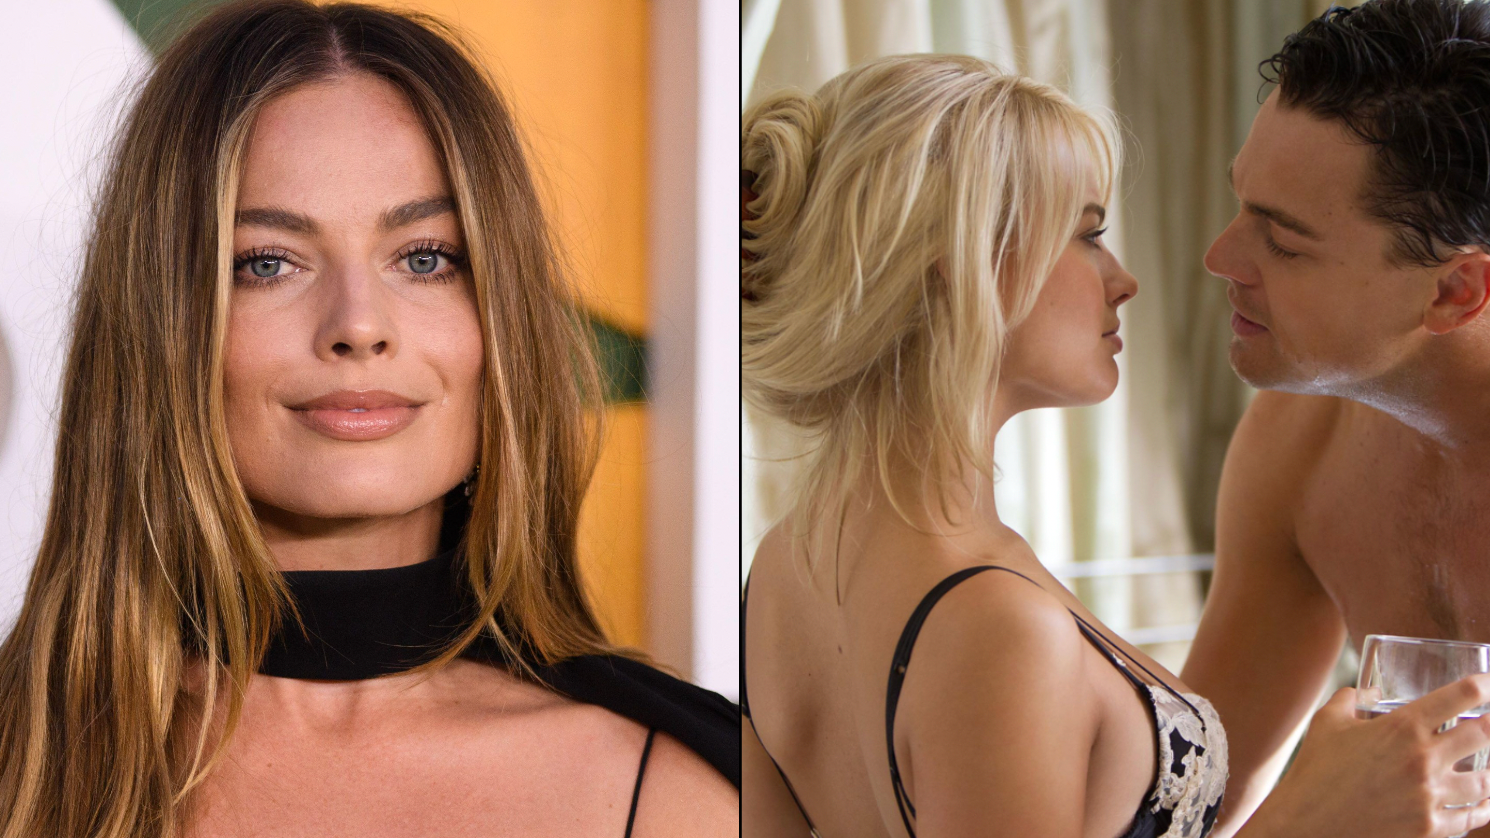 Margot Robbie addresses how real breasts and pubic hair are filmed during sex scenes